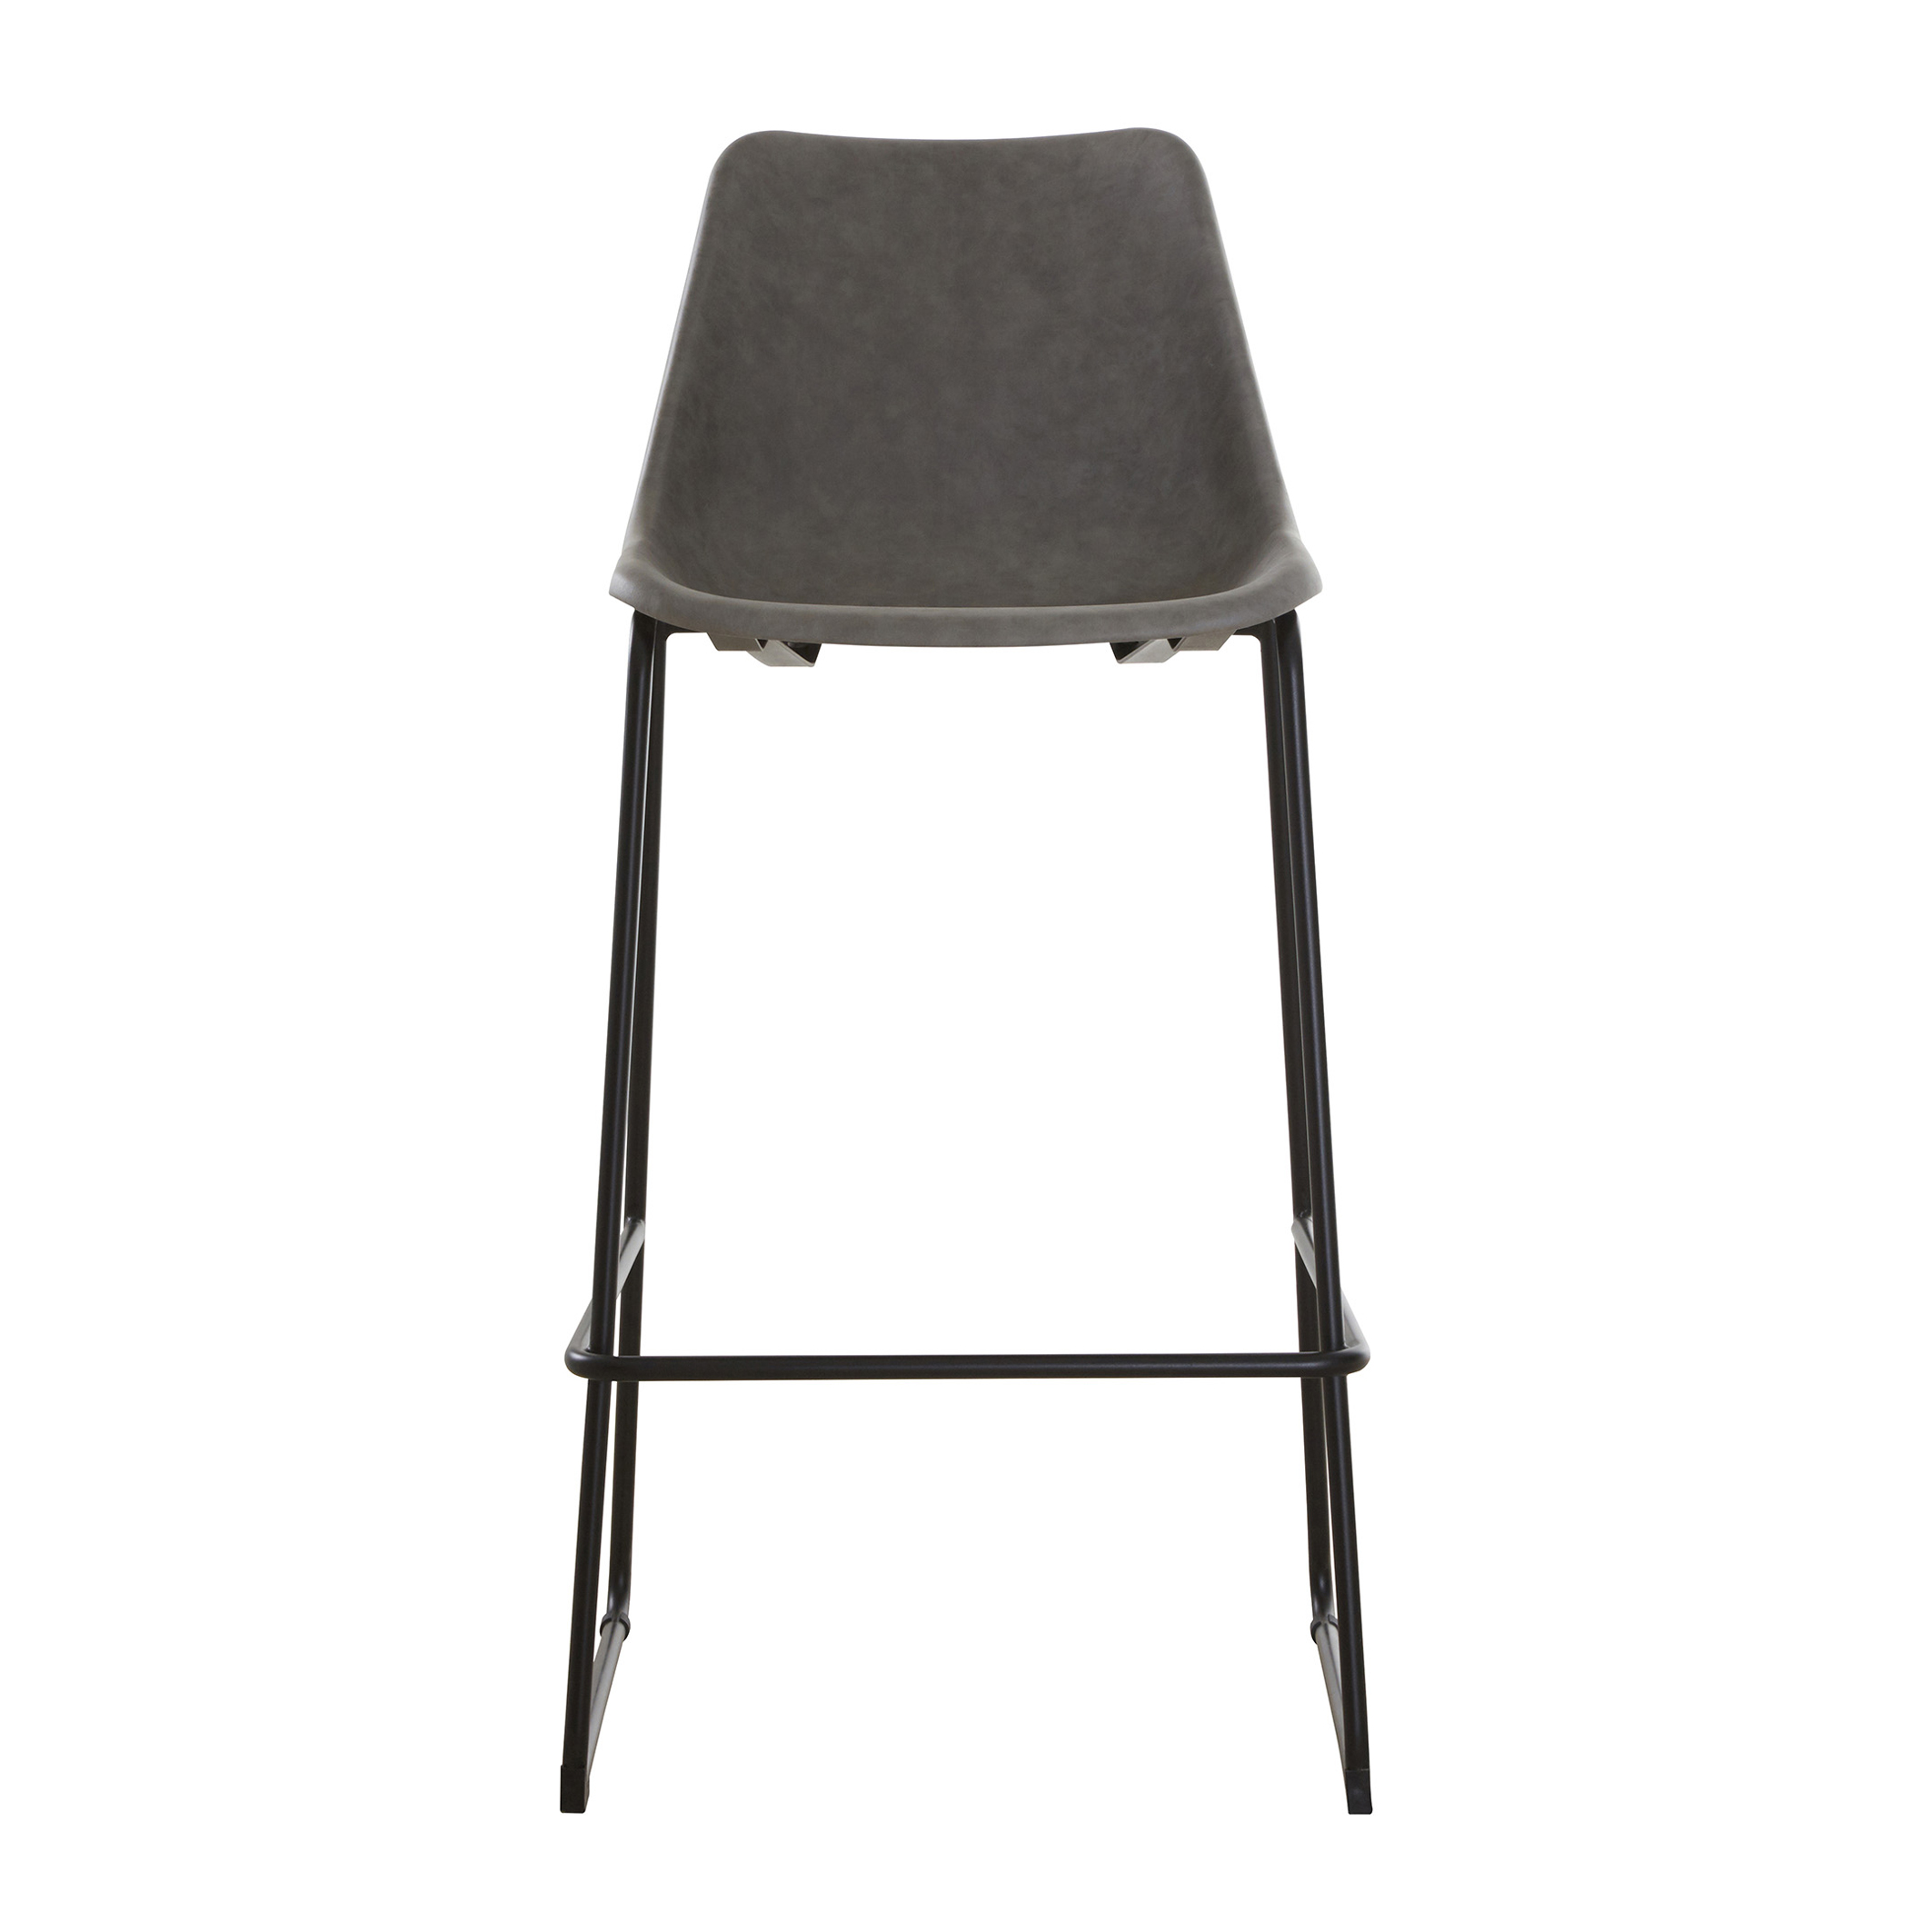 Bar Stool In Vintage Ash Faux Leather, Why Are Bar Stools So High